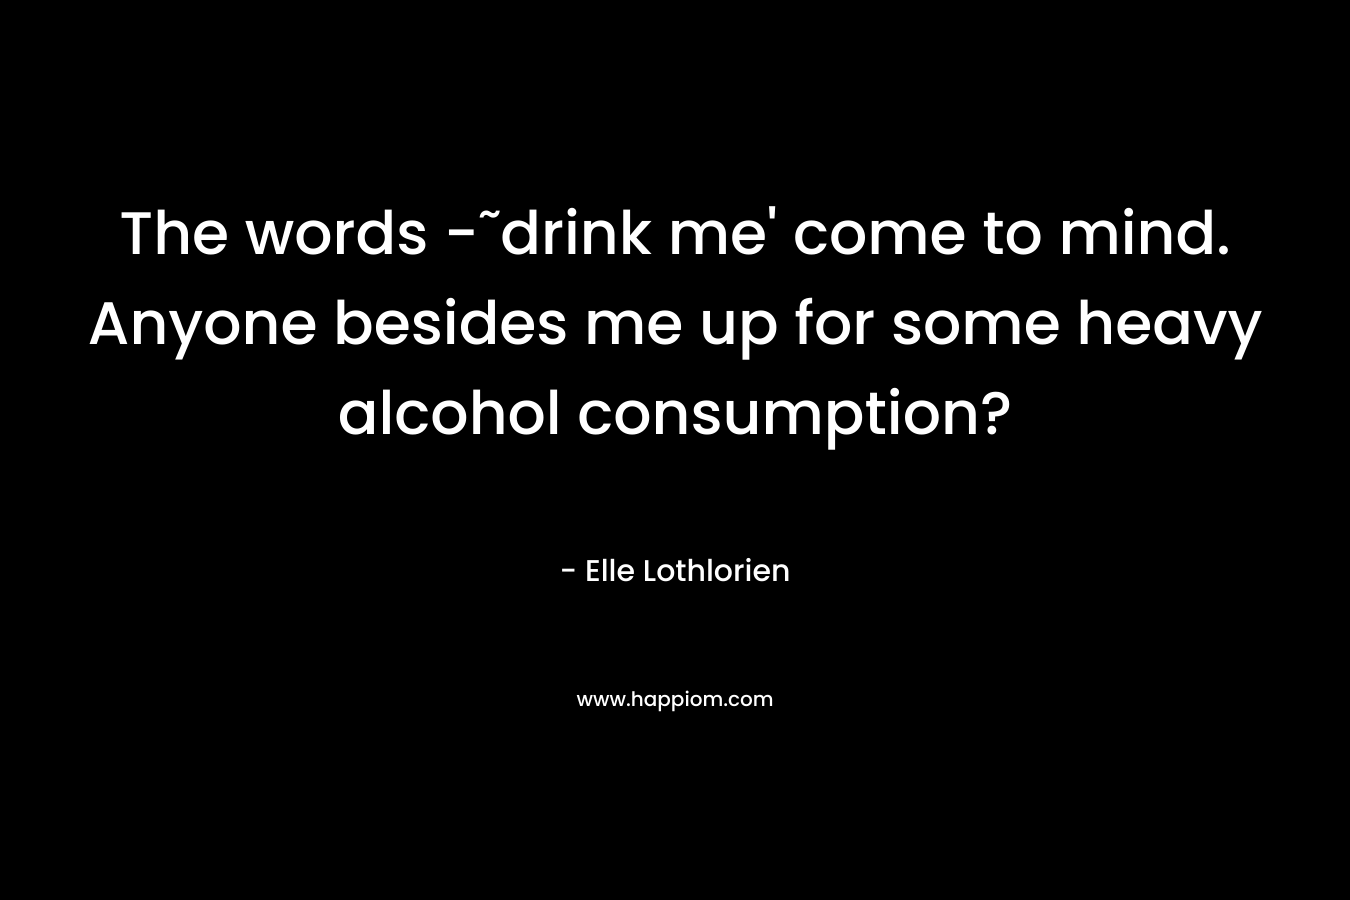 The words -˜drink me' come to mind. Anyone besides me up for some heavy alcohol consumption?